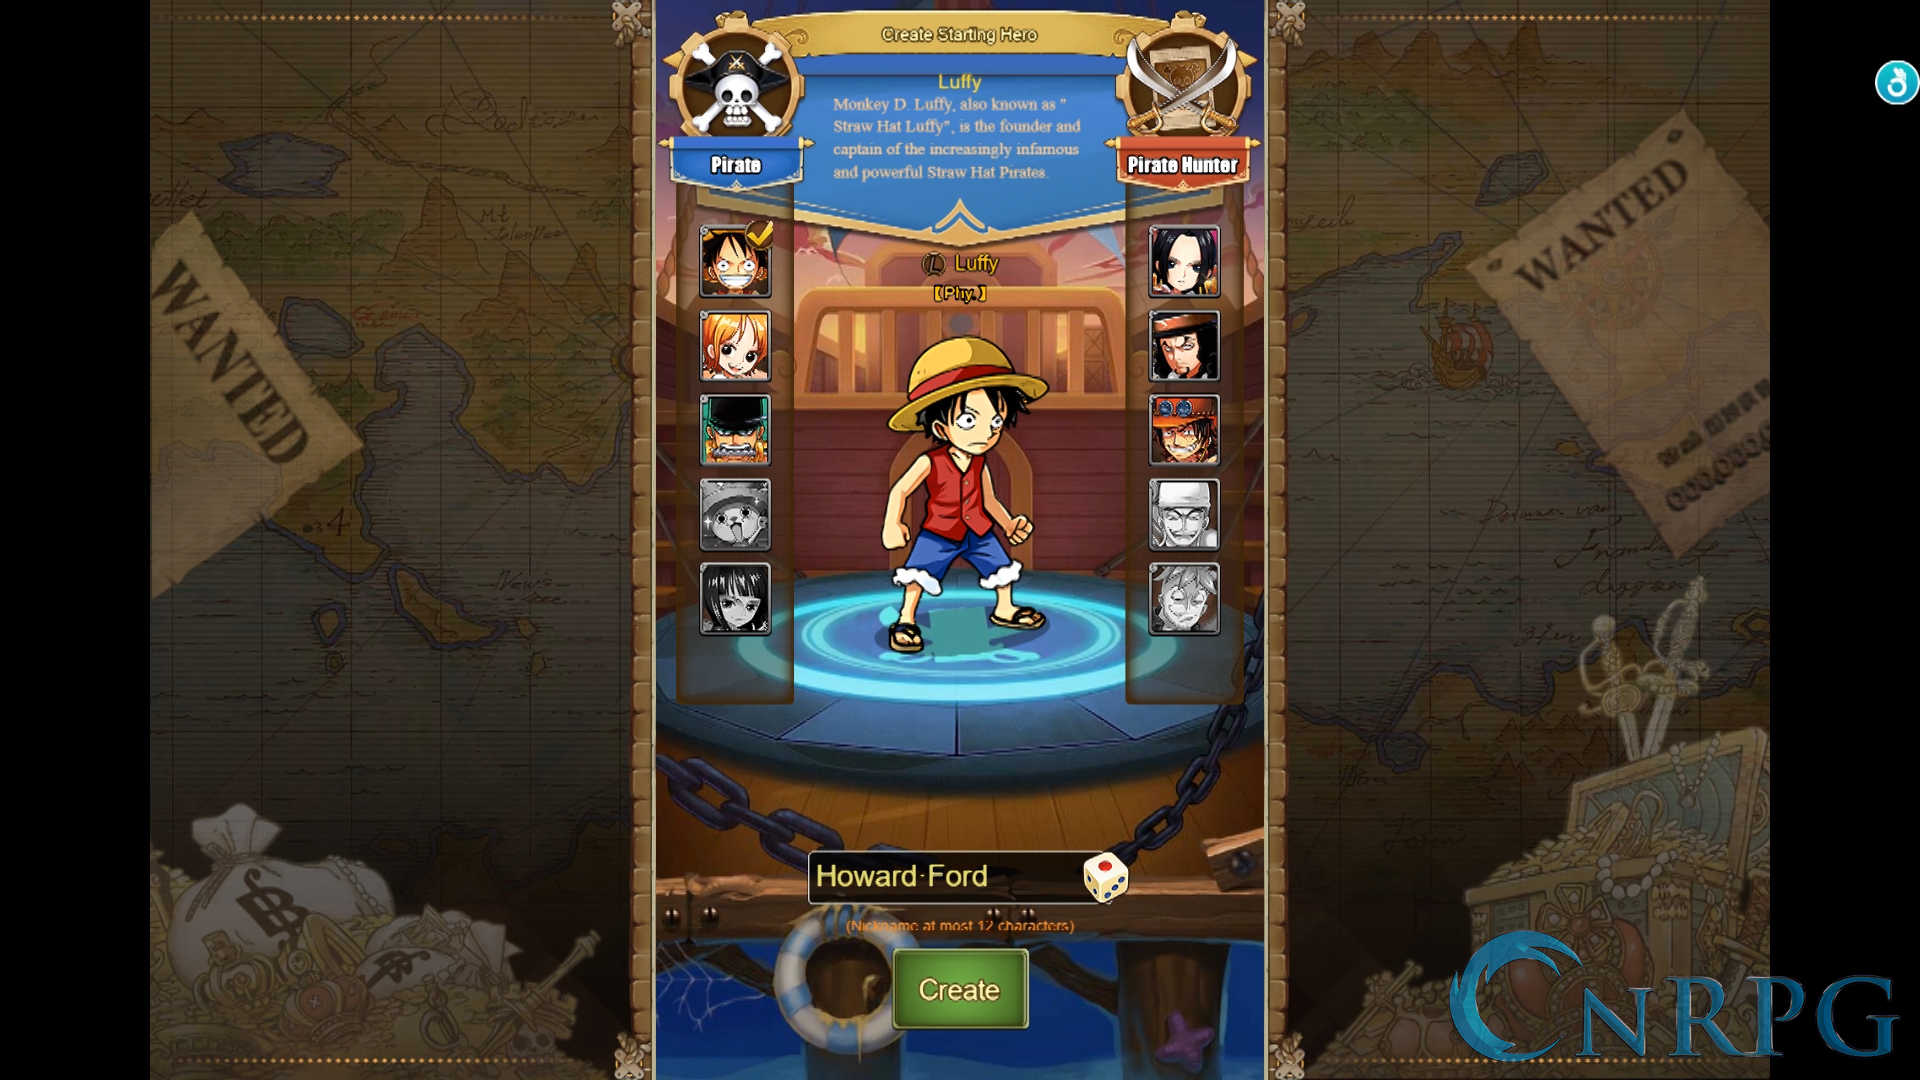 One Pirate Odyssey Idle RPG & All 25 Codes  25 Giftcodes One Odyssey Idle  RPG - How to Redeem Code 